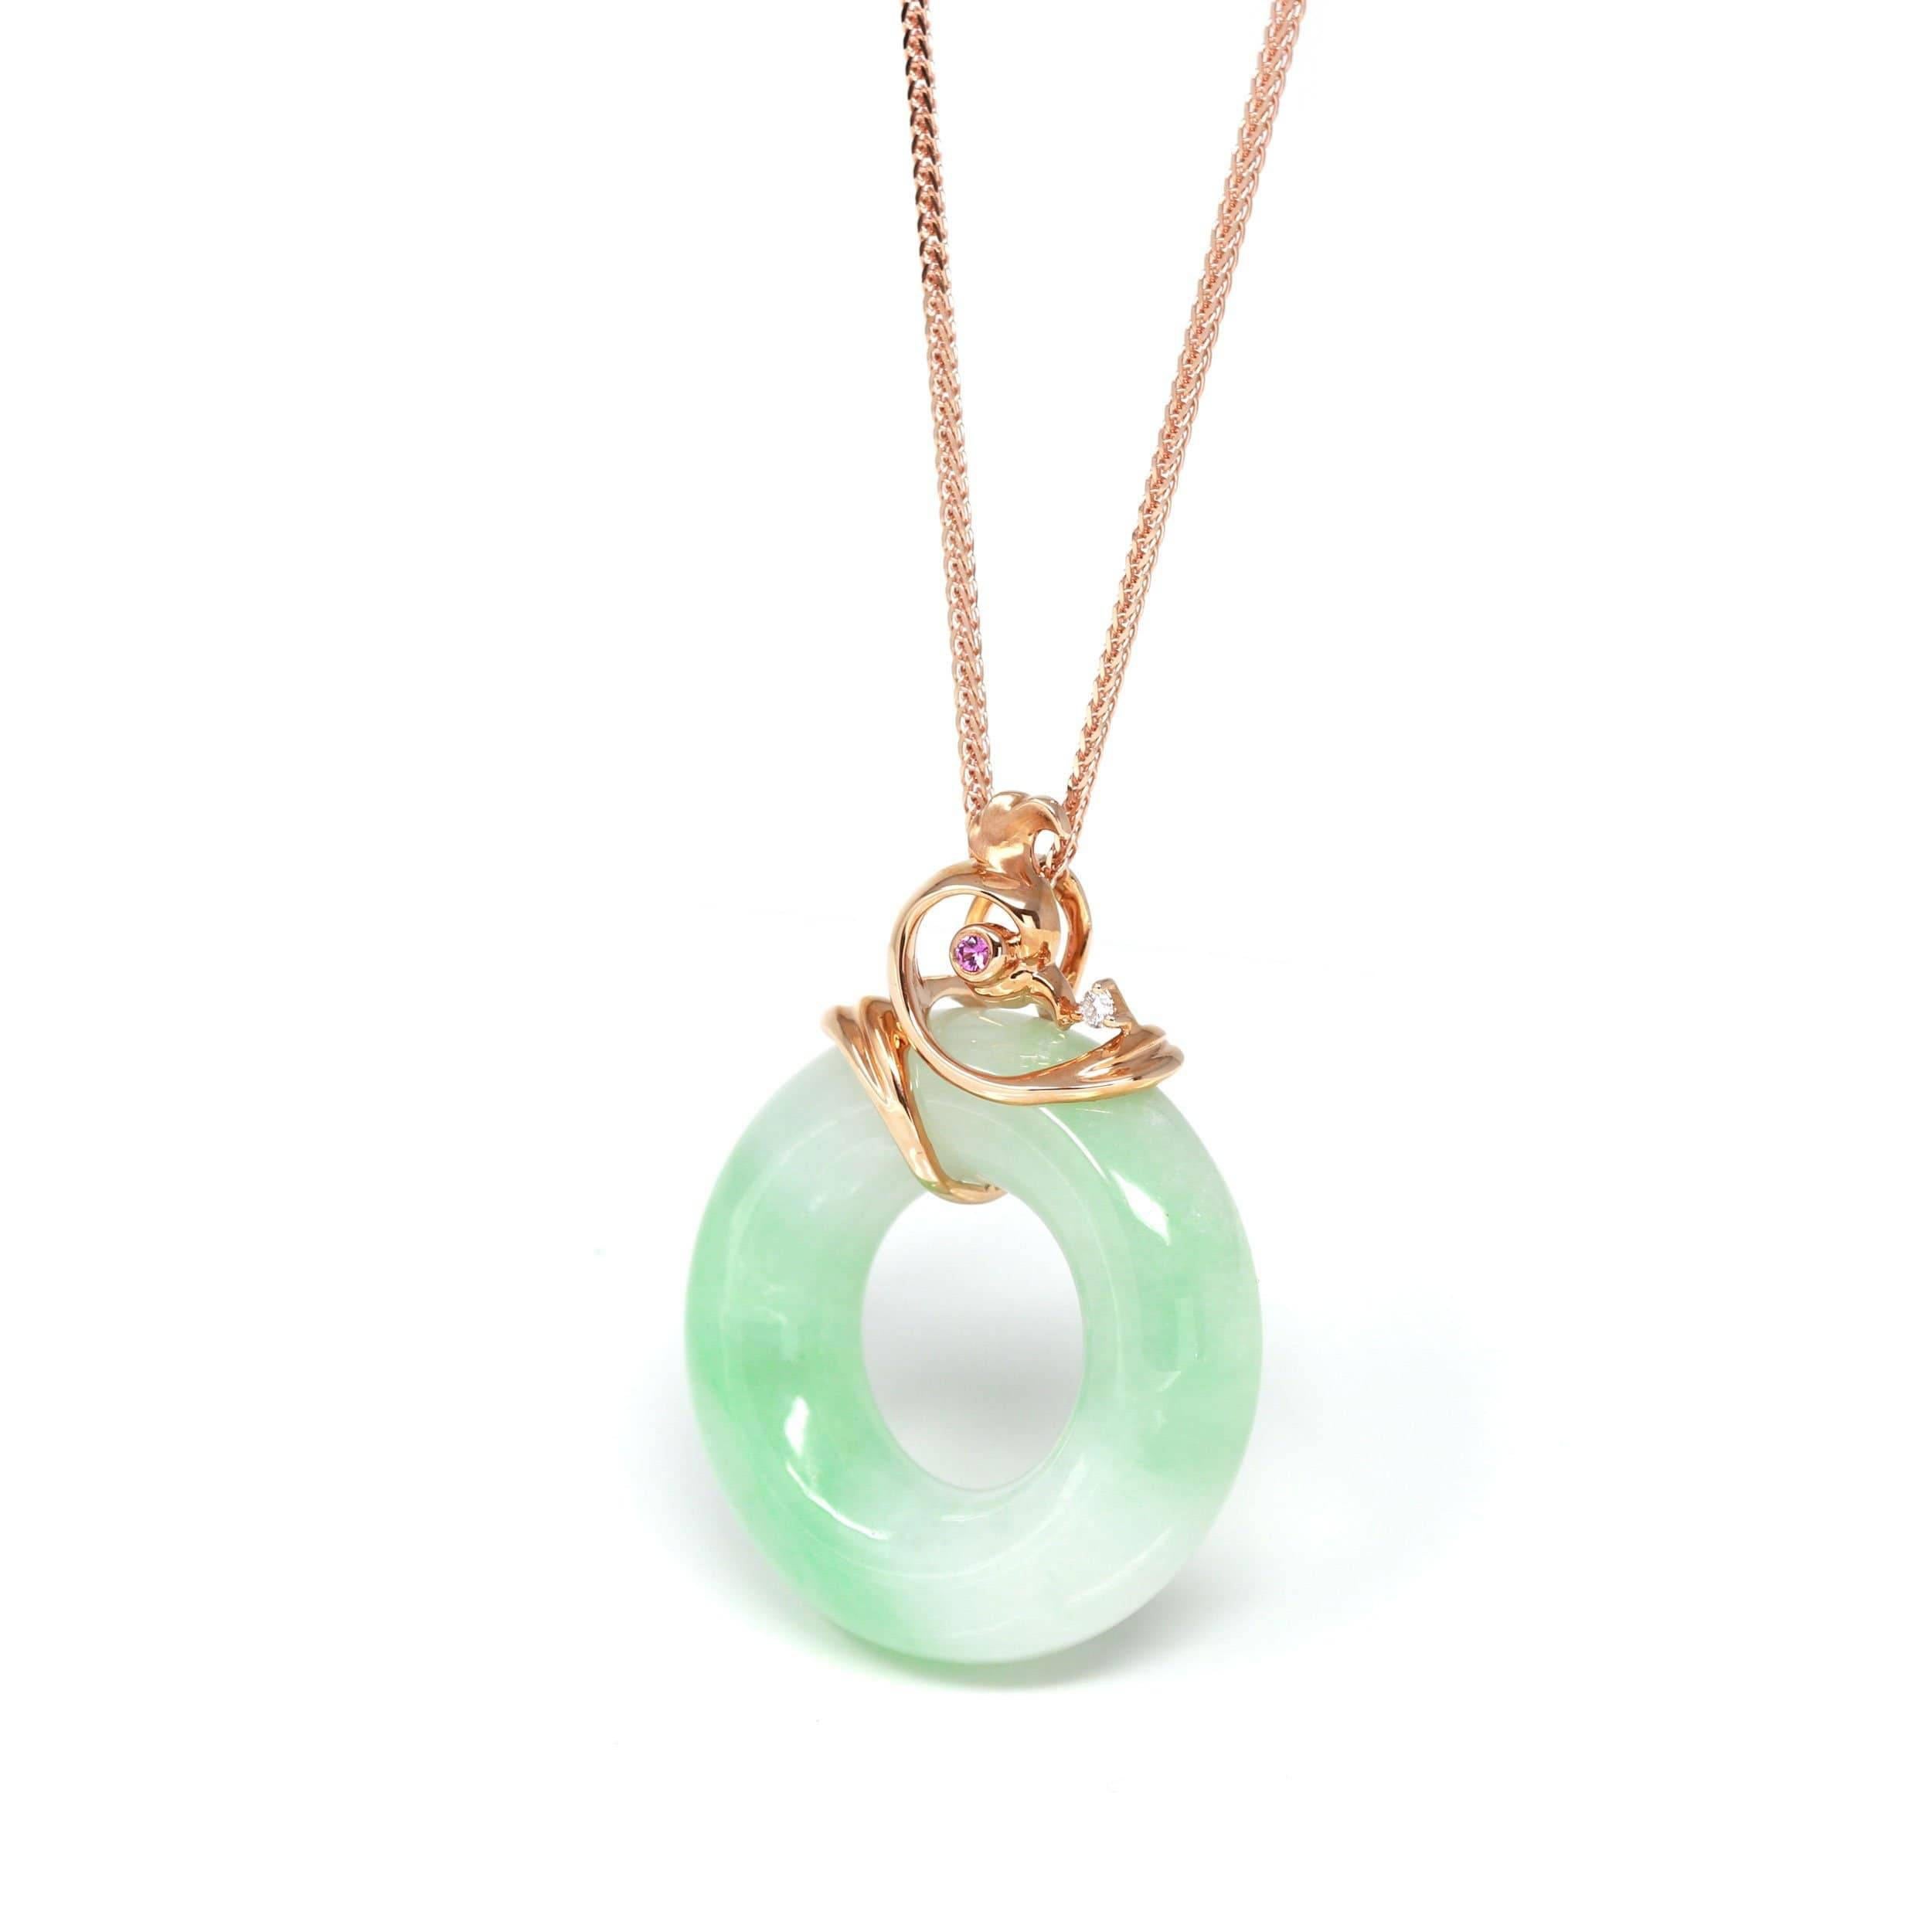 DESIGN CONCEPT--- 18k Rose Gold & Genuine Burmese Jadeite Pendant Necklace With AA Ruby. This pendant made with high-quality genuine jadeite with some green, The jadeite piece looks so clean and smooth without any clouds or cracks or any dirty